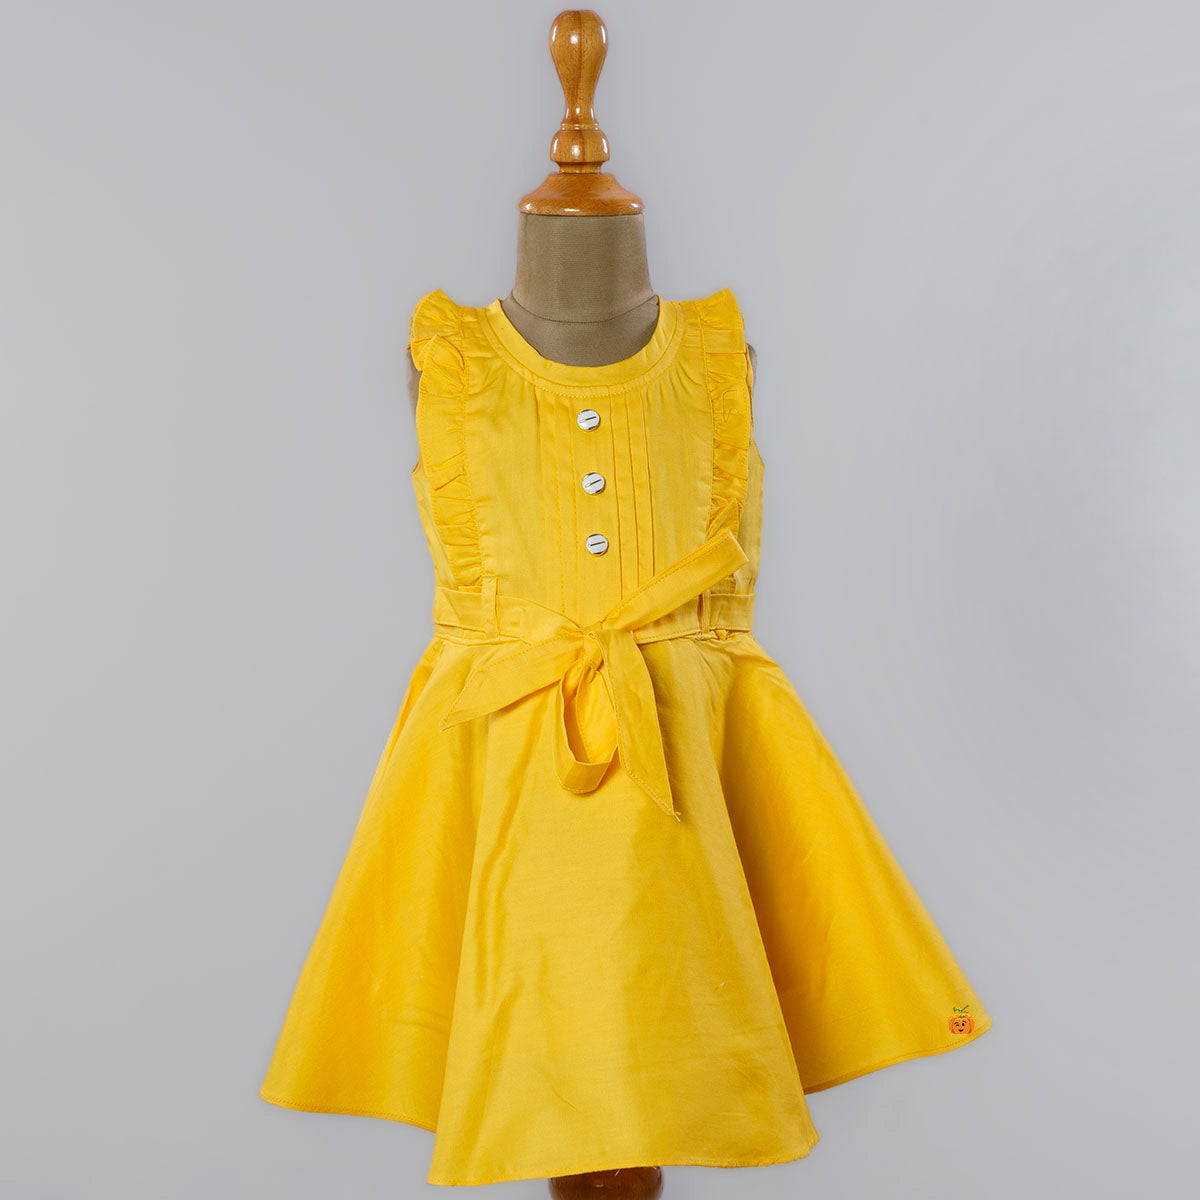 Discover more than 199 frock designs for girls stitching super hot